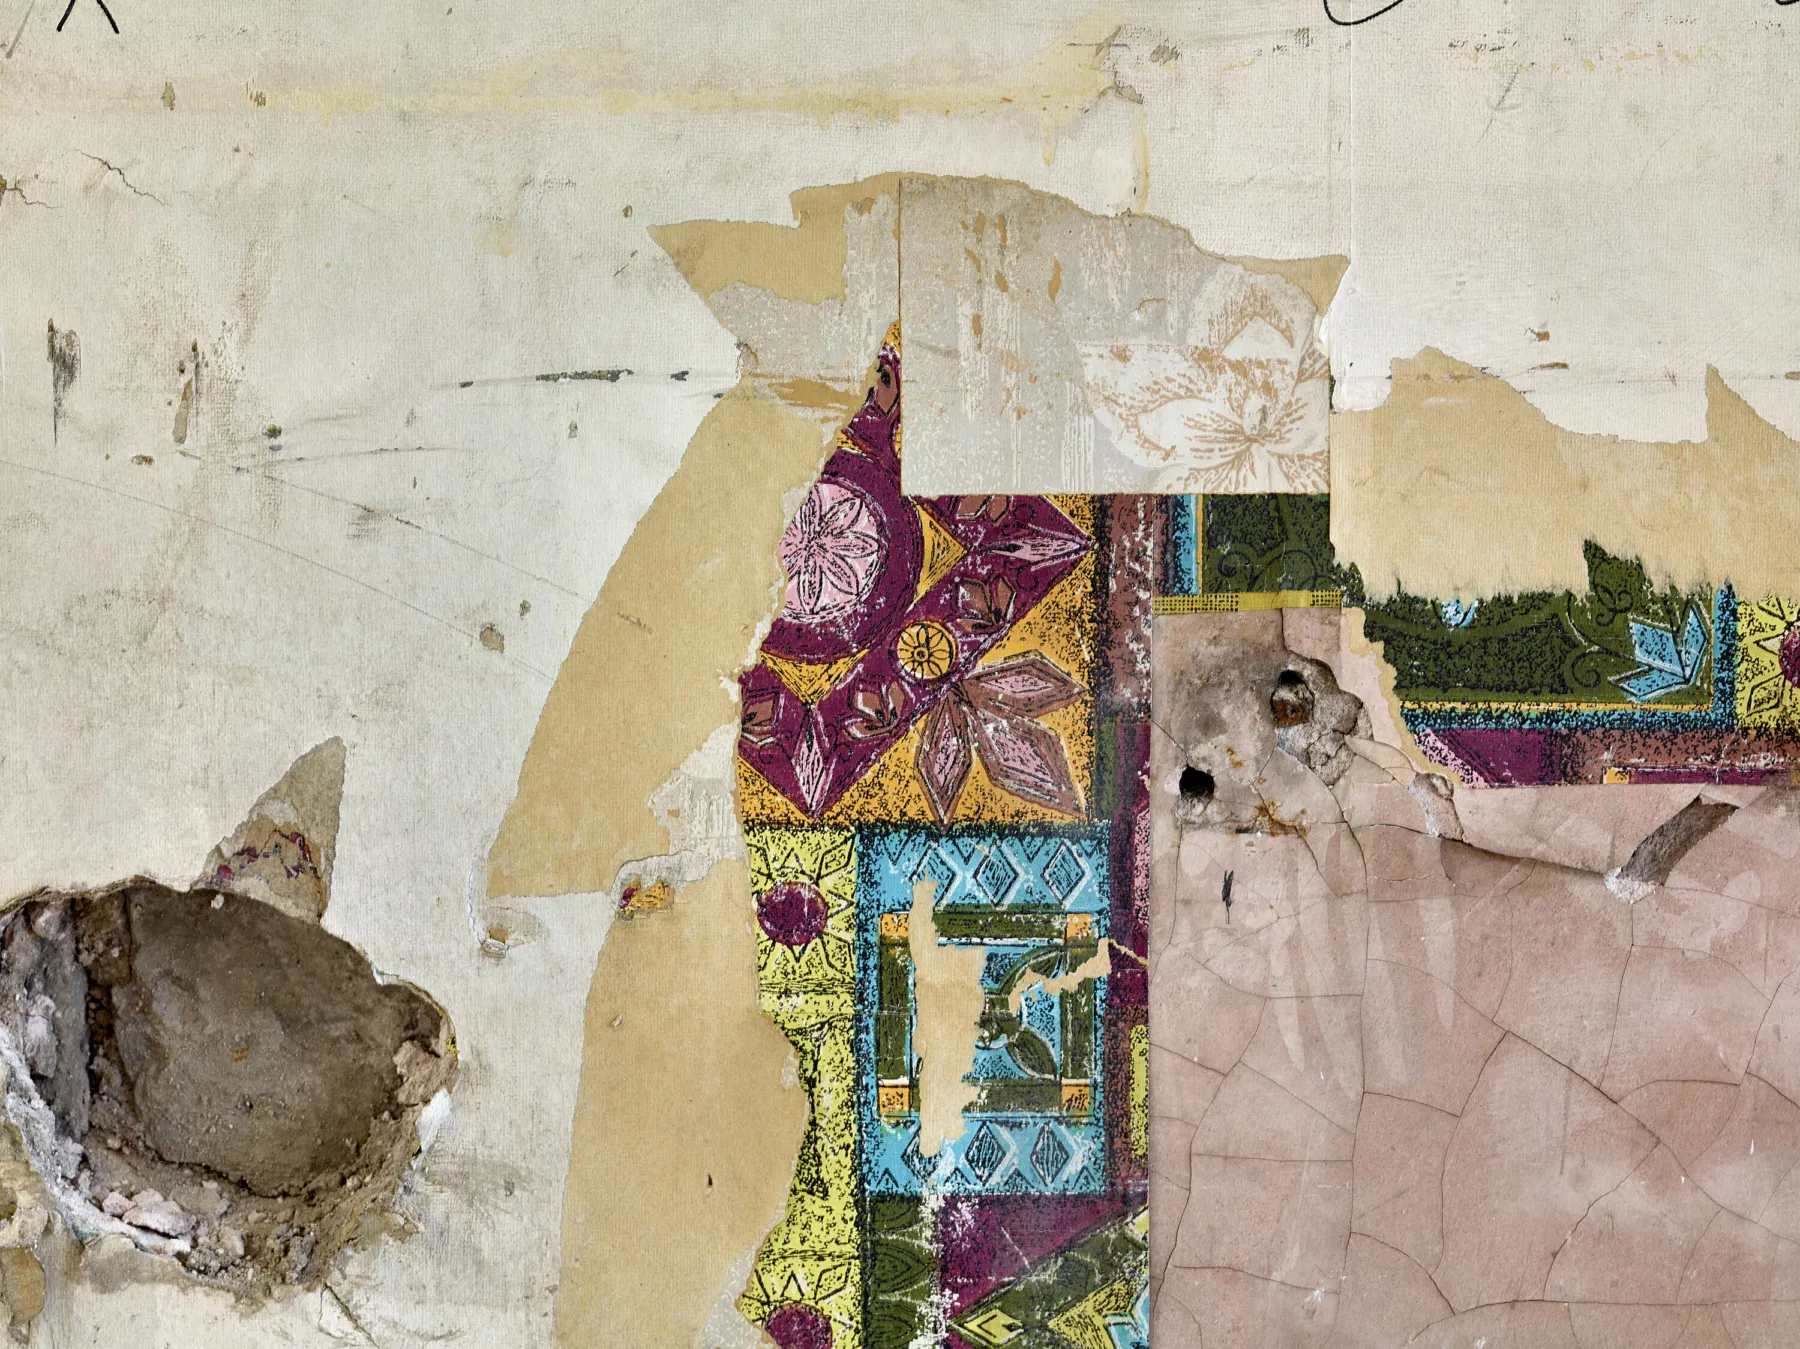 Detail from a defurbished interior in Edinburgh offices - Patterned wallpaper and old paint is revealed and left exposed